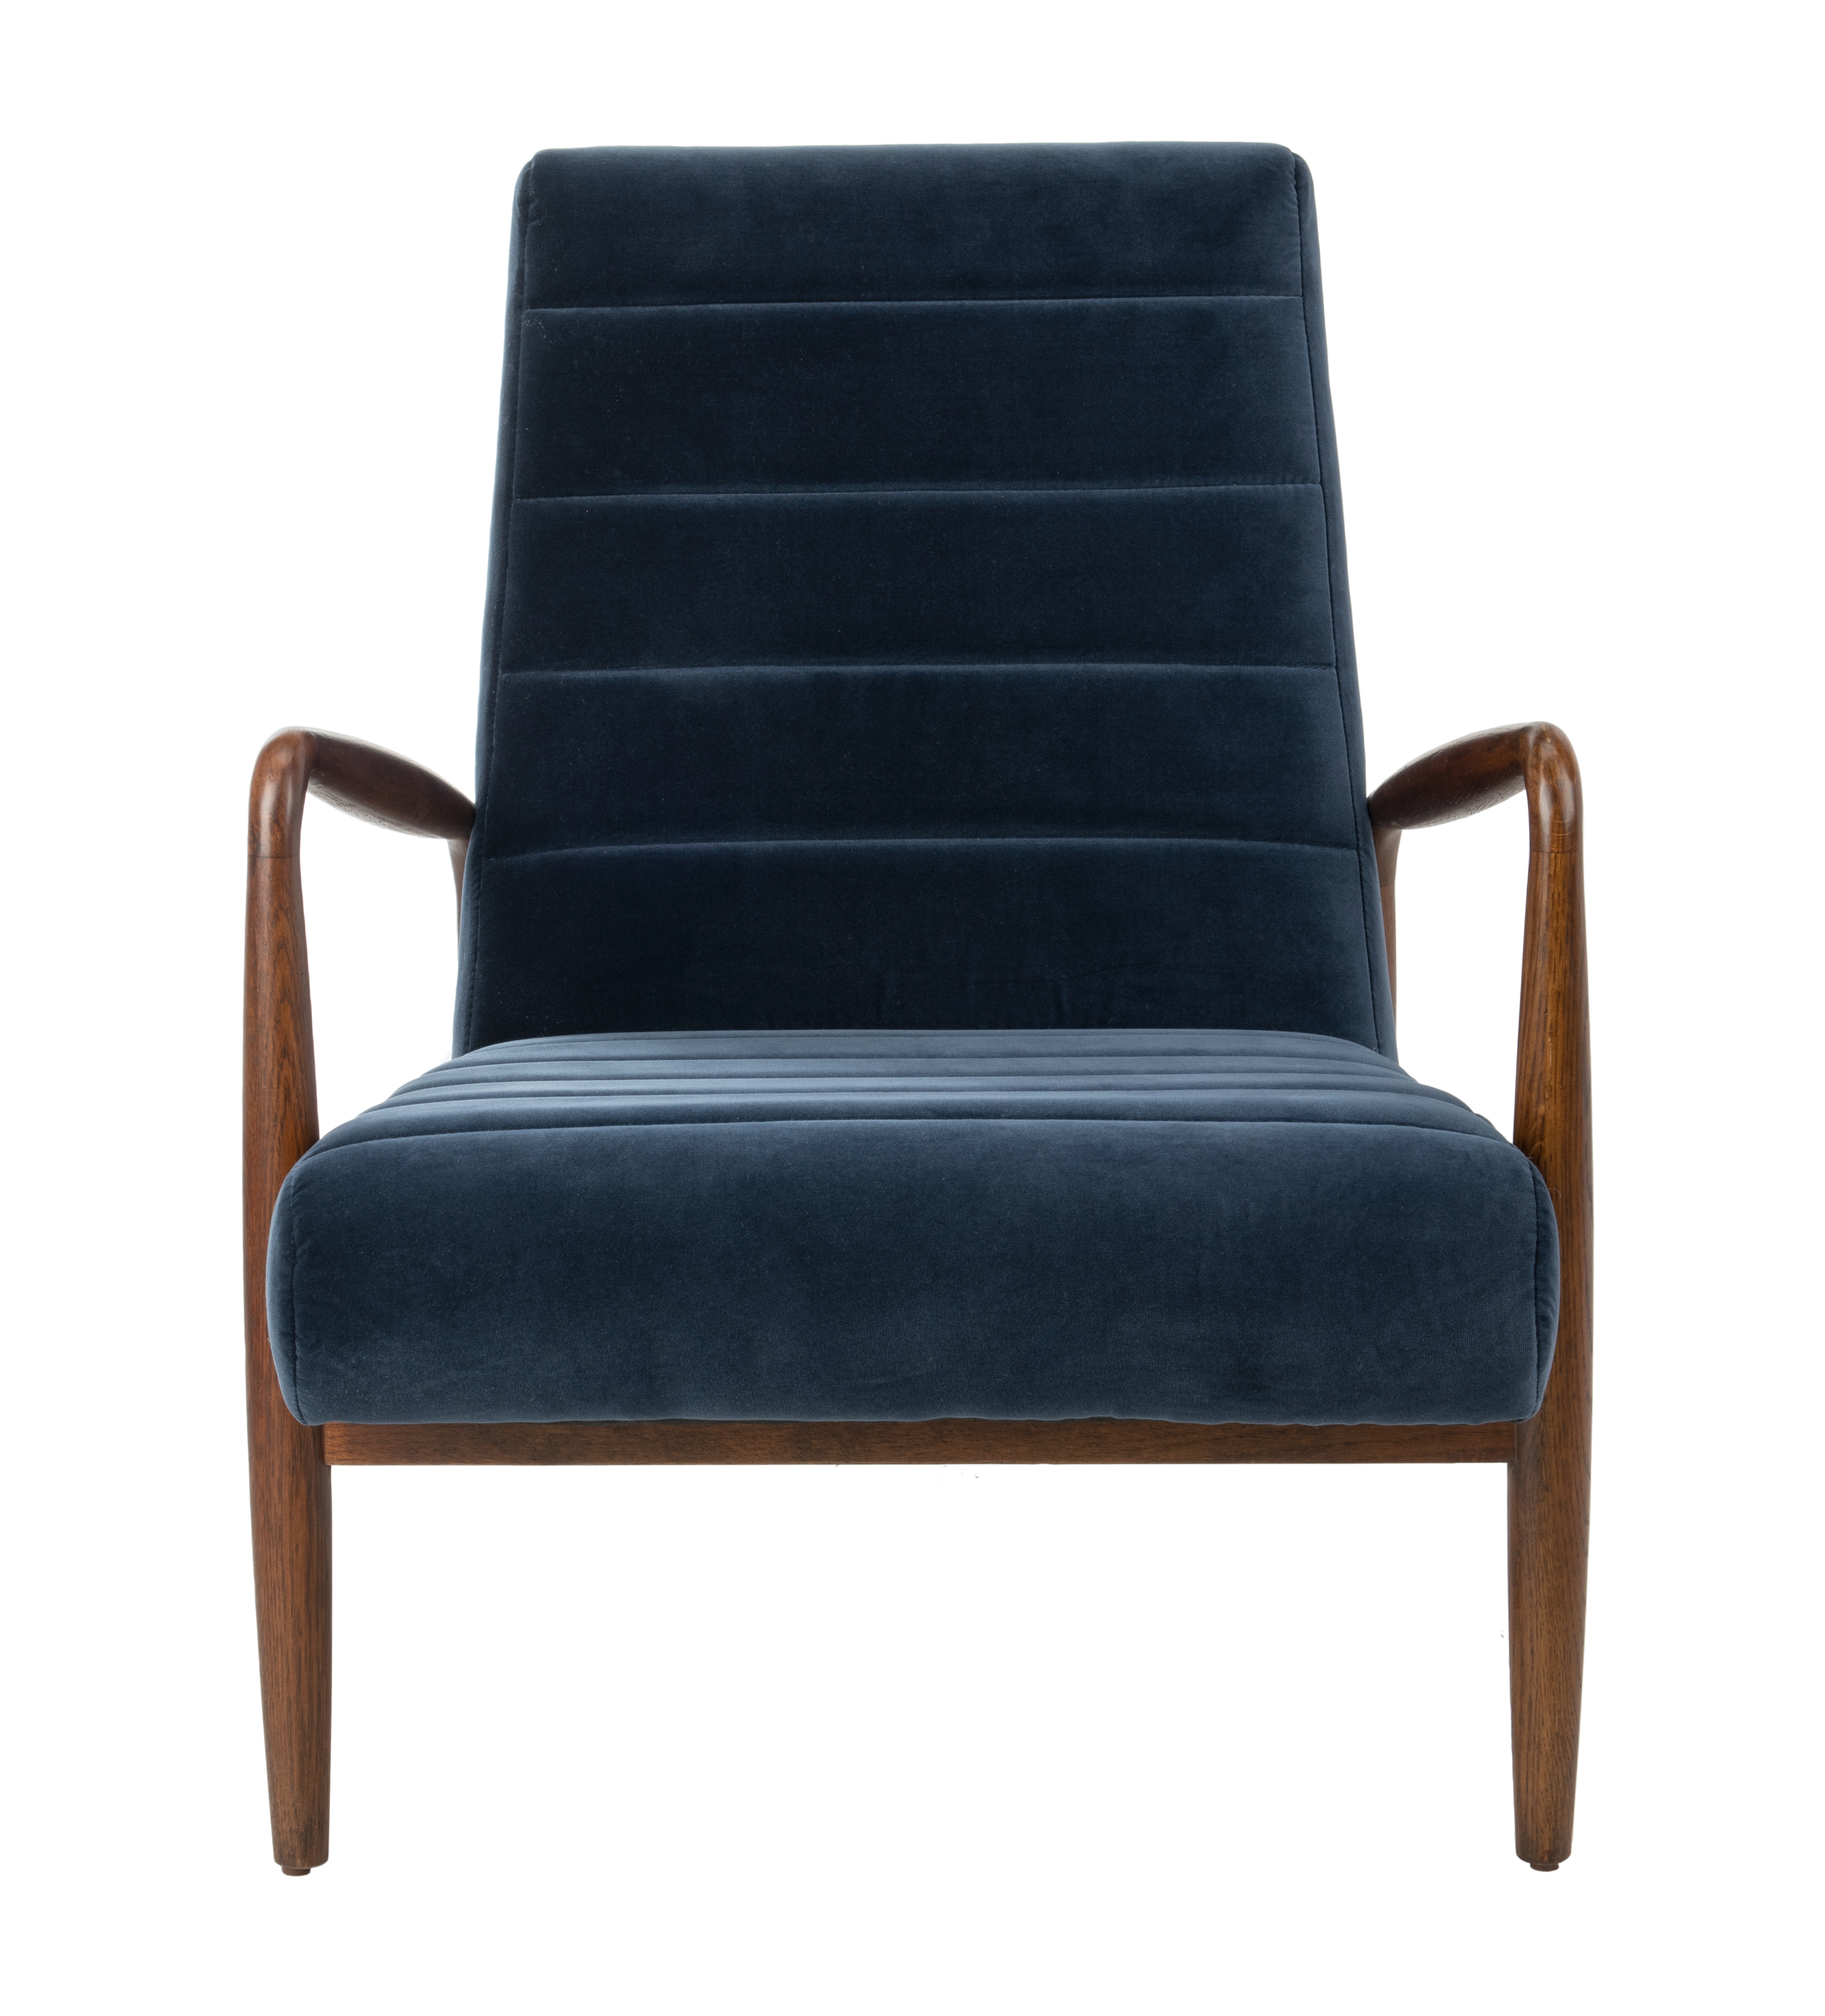 Willow Channel Tufted Arm Chair - Navy/Dark Walnut - Arlo Home - Image 1